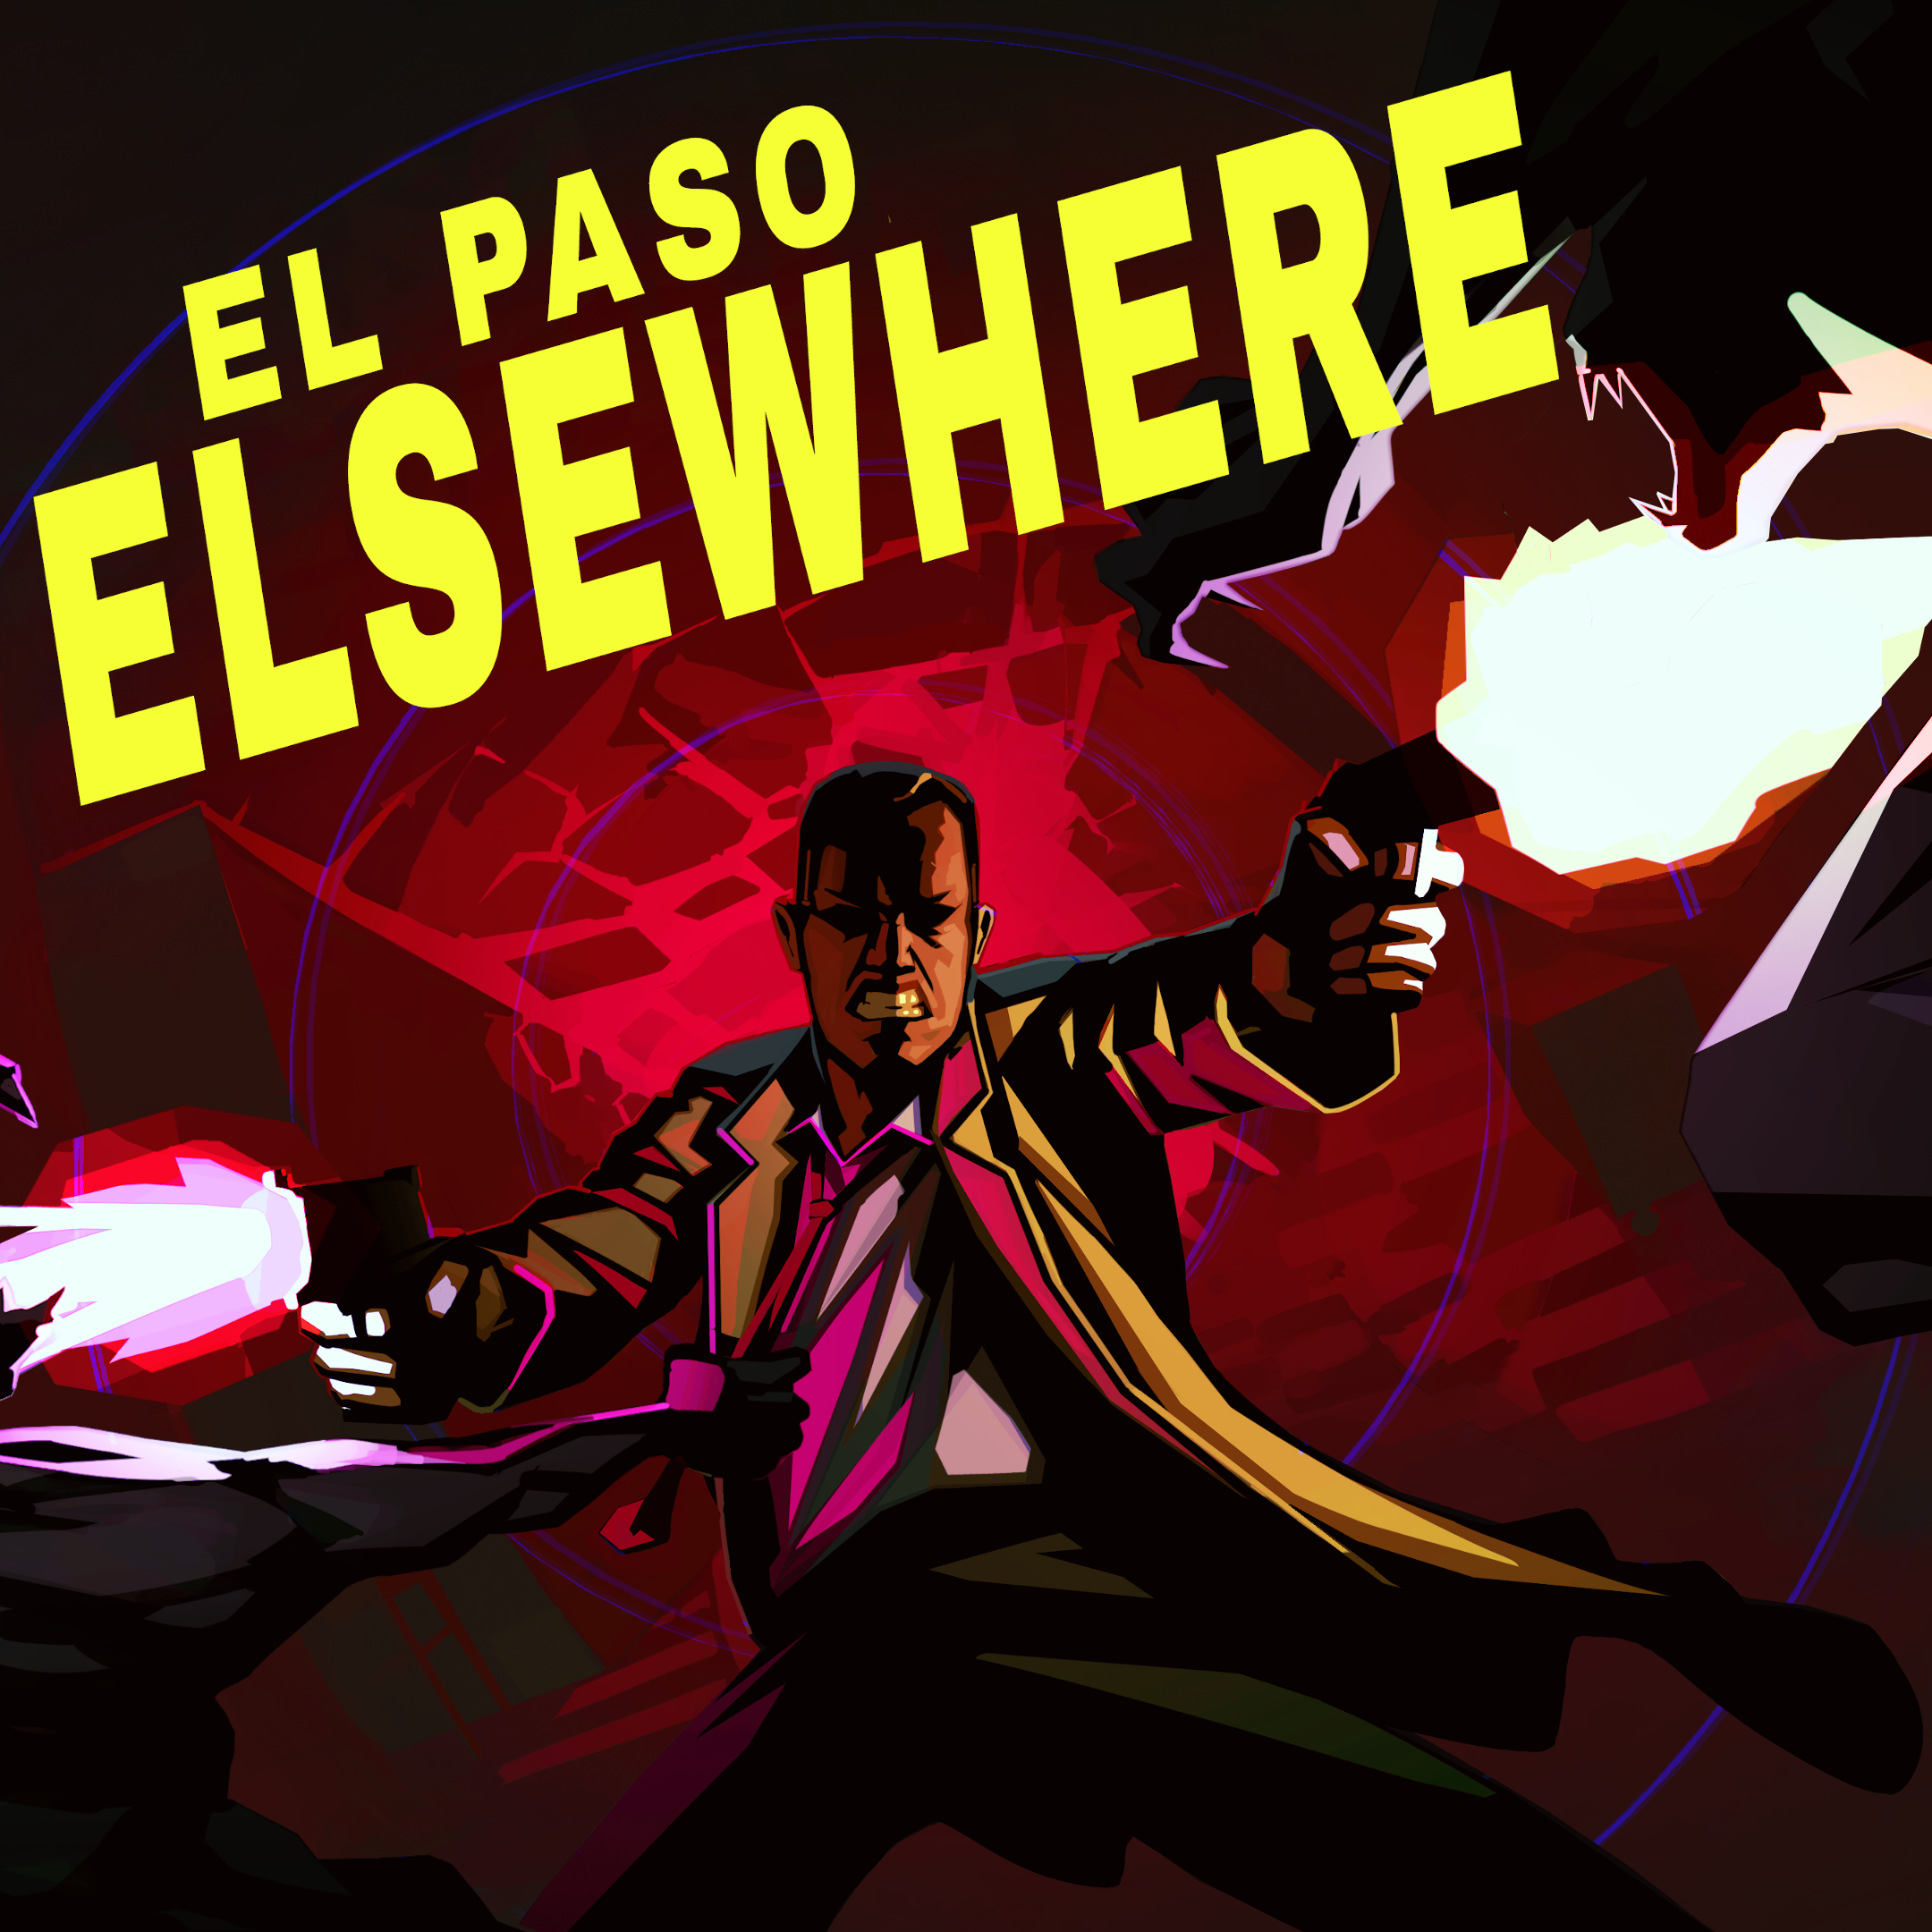 A  promotional image for El Paso, Elsewhere